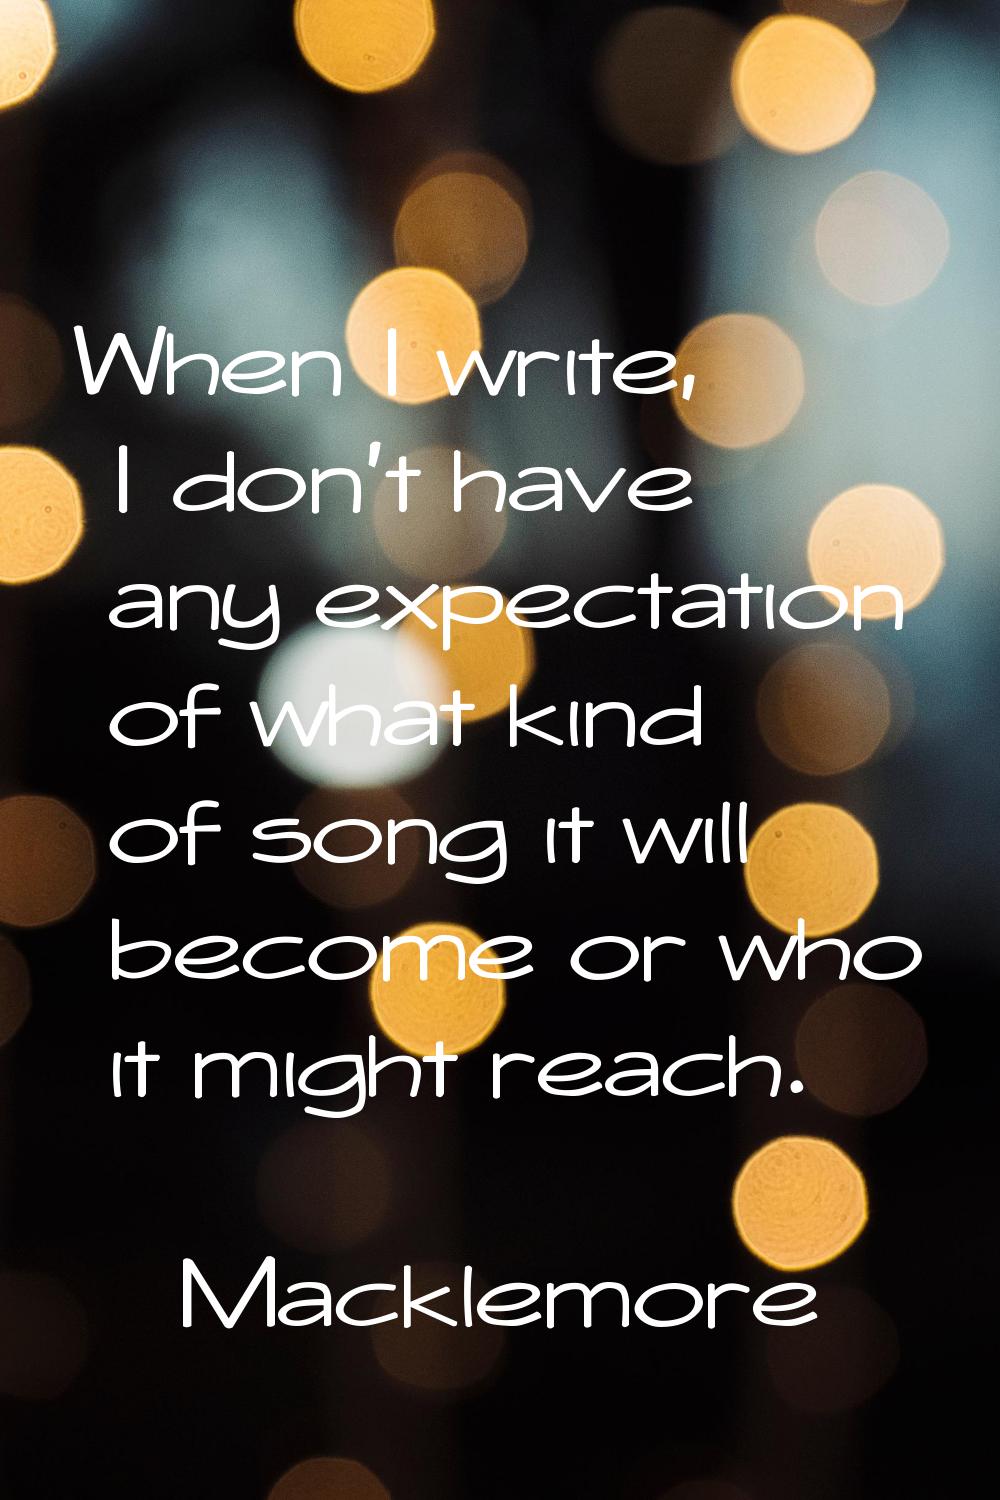 When I write, I don't have any expectation of what kind of song it will become or who it might reac